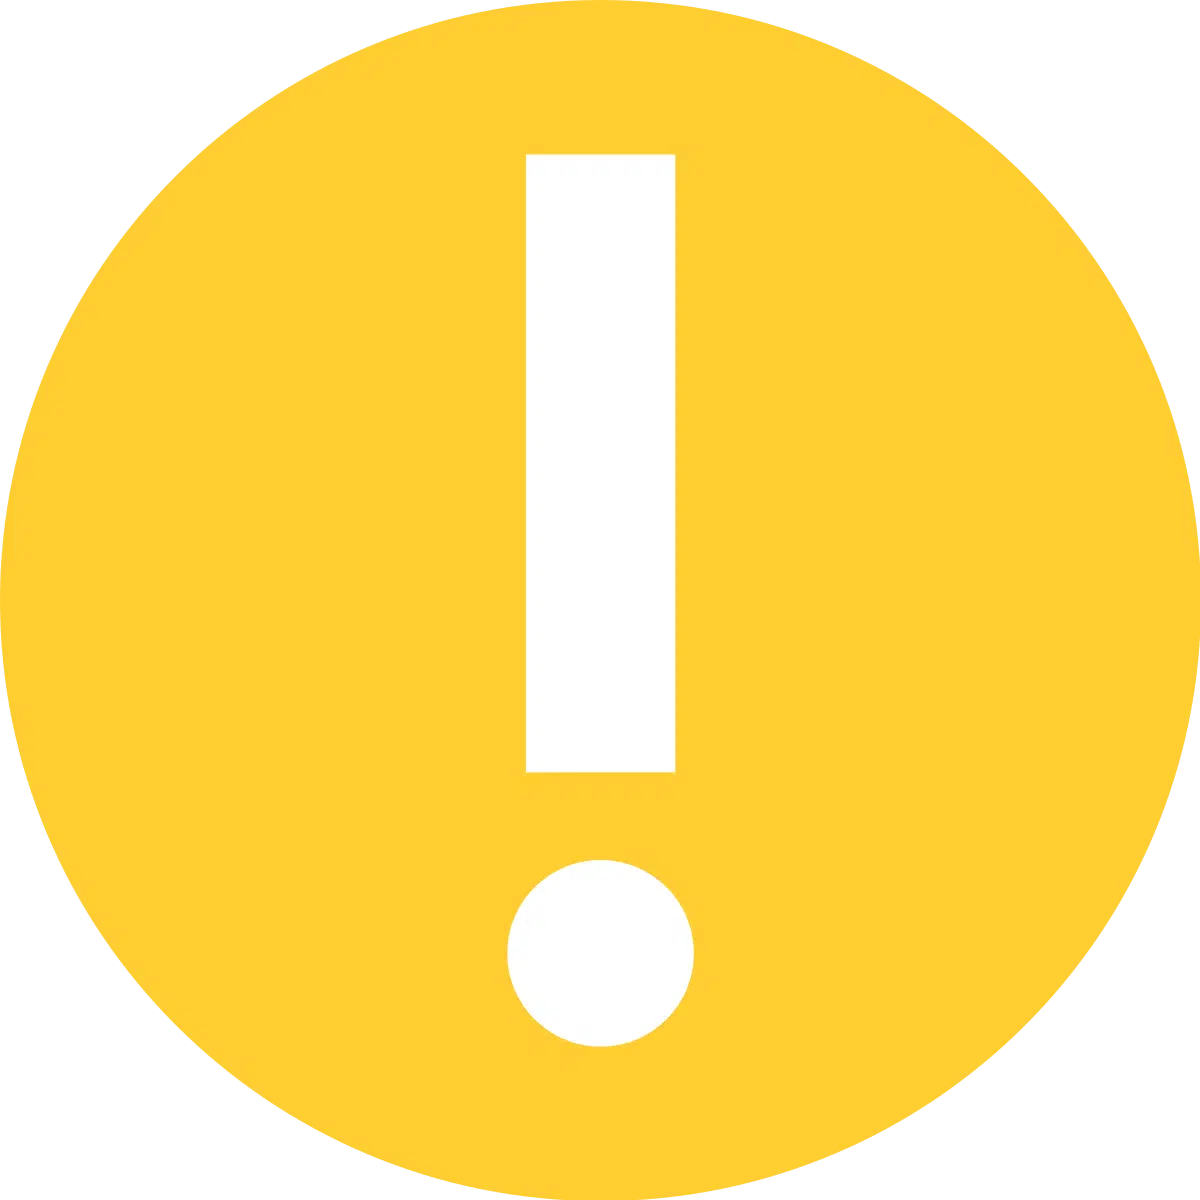 1200px-Exclamation_yellow_flat_icon.svg